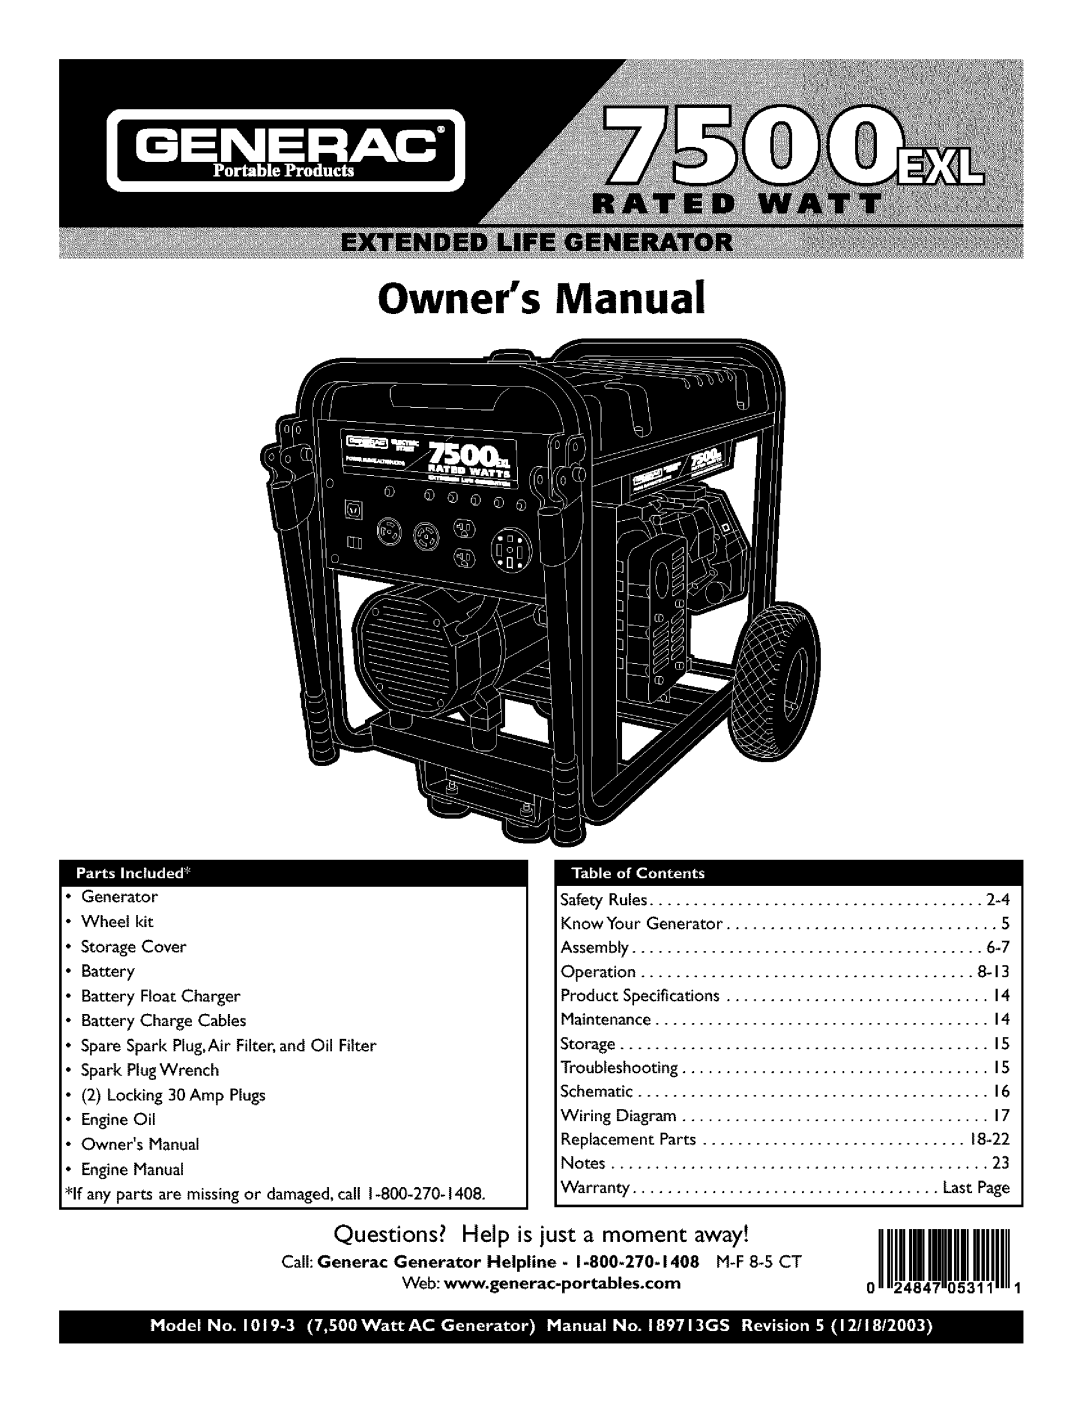 Generac 1019-3 owner manual Questions? Help is just a moment away 